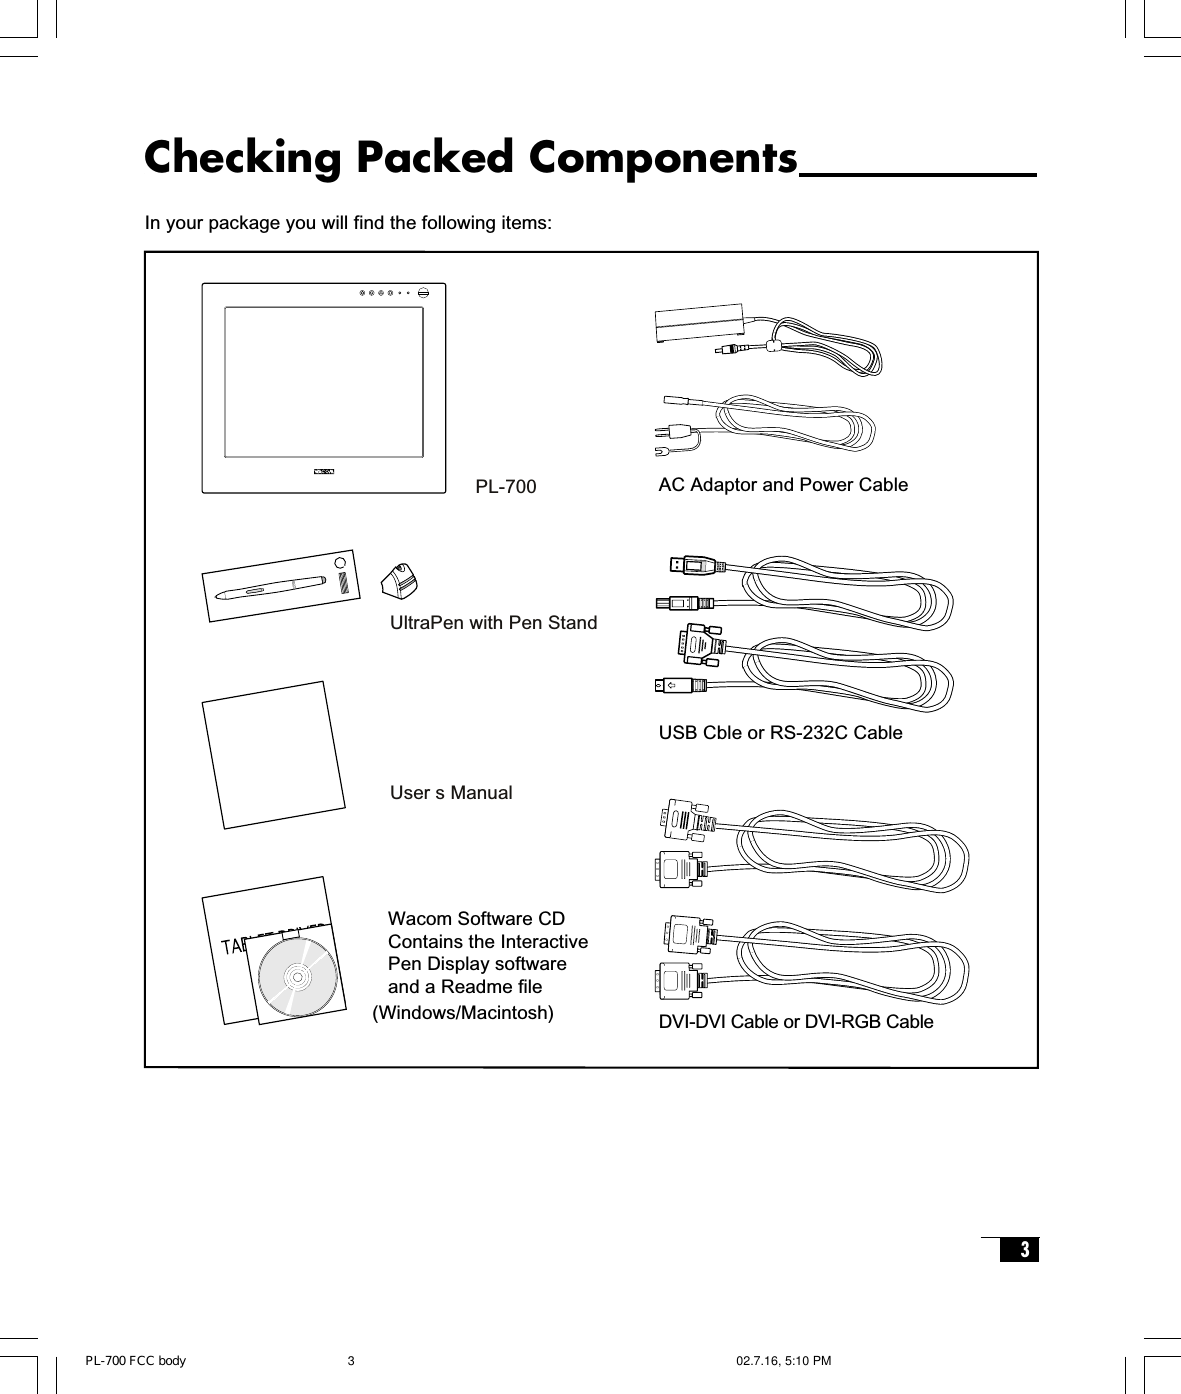 3Checking Packed ComponentsIn your package you will find the following items:USB Cble or RS-232C CableDVI-DVI Cable or DVI-RGB CablePL-700UltraPen with Pen StandUser s ManualWacom Software CDContains the InteractivePen Display softwareand a Readme file(Windows/Macintosh)AC Adaptor and Power CablePL-700 FCC body 02.7.16, 5:10 PM3